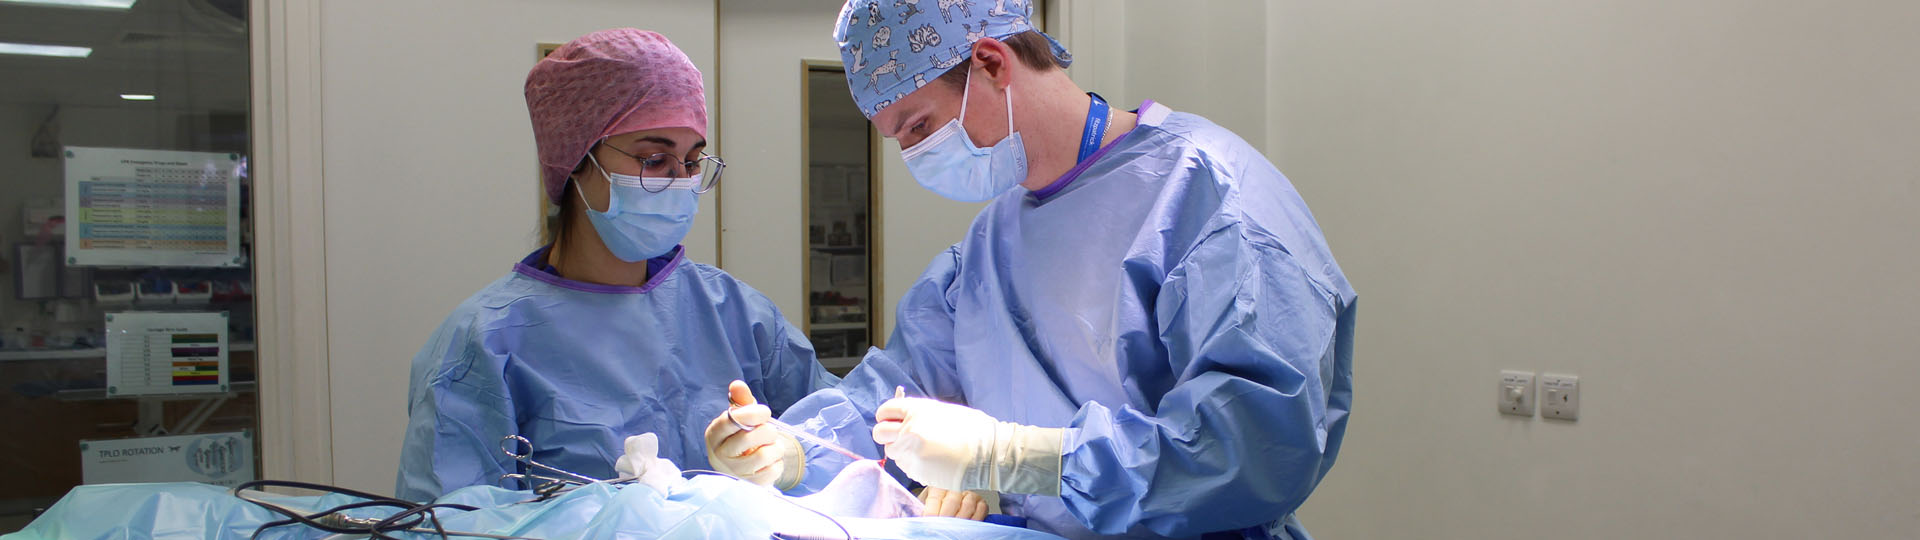 Vet on surgical internship programme assisting clinician in surgery